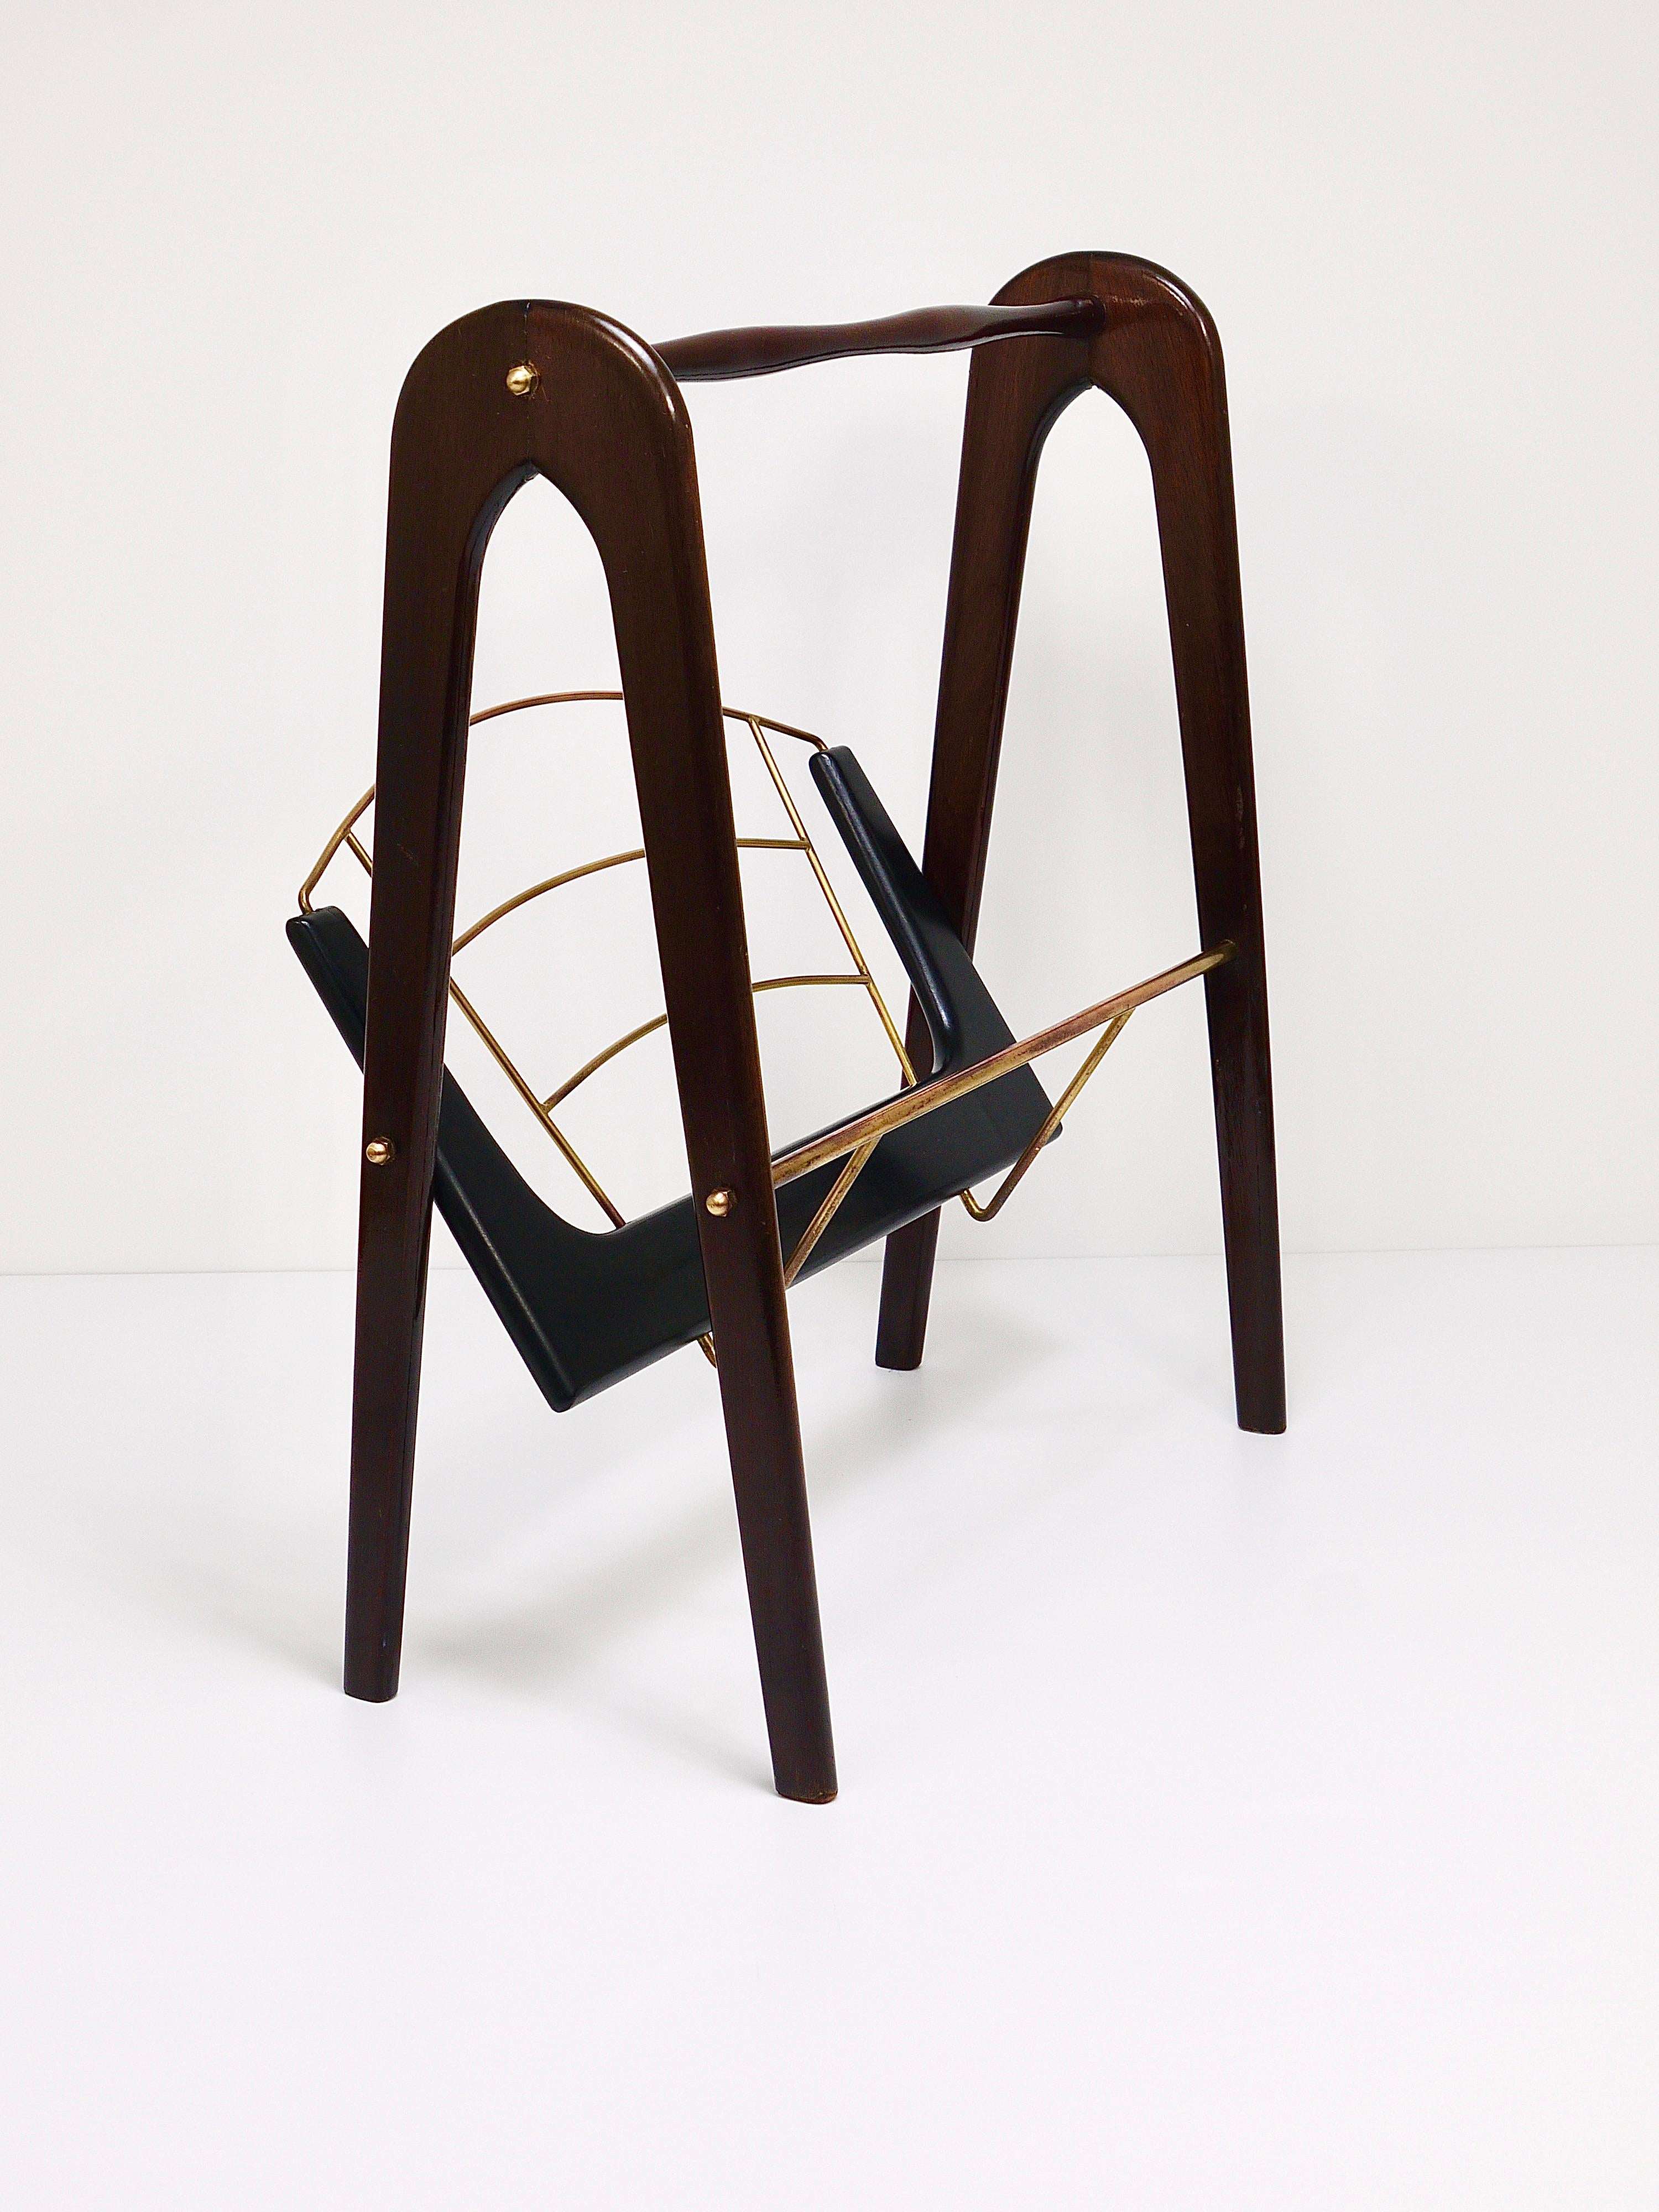 Cesare Lacca Midcentury Magazine Rack, Mahogany & Brass, Italy, 1950s For Sale 5